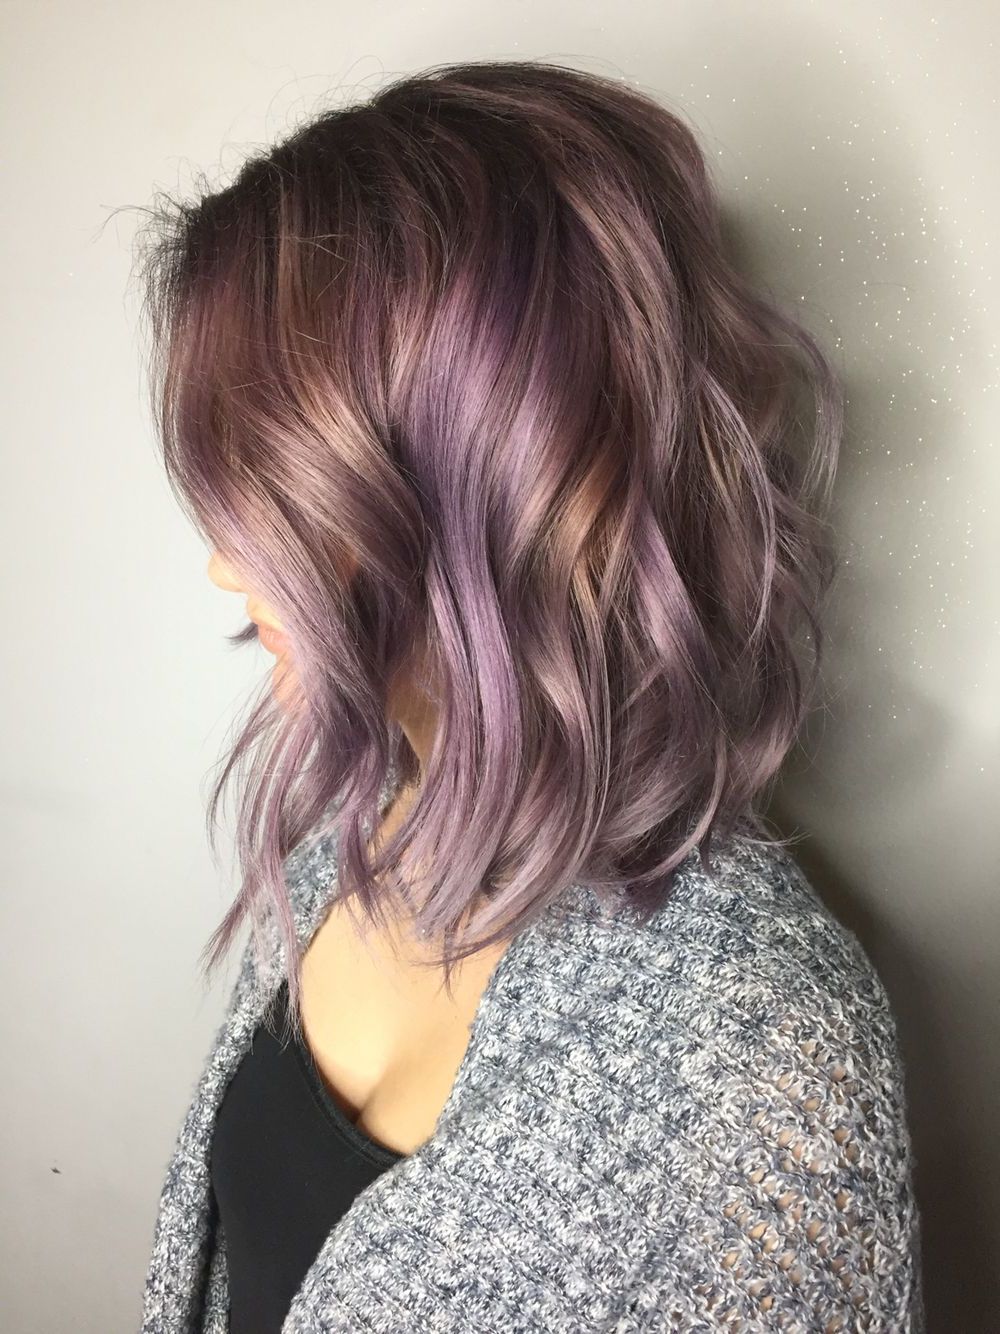 Smokey Lavender Hair Color | Magical Hair Colors In 2018 | Pinterest Pertaining To Lavender Haircuts With Side Part (View 10 of 20)